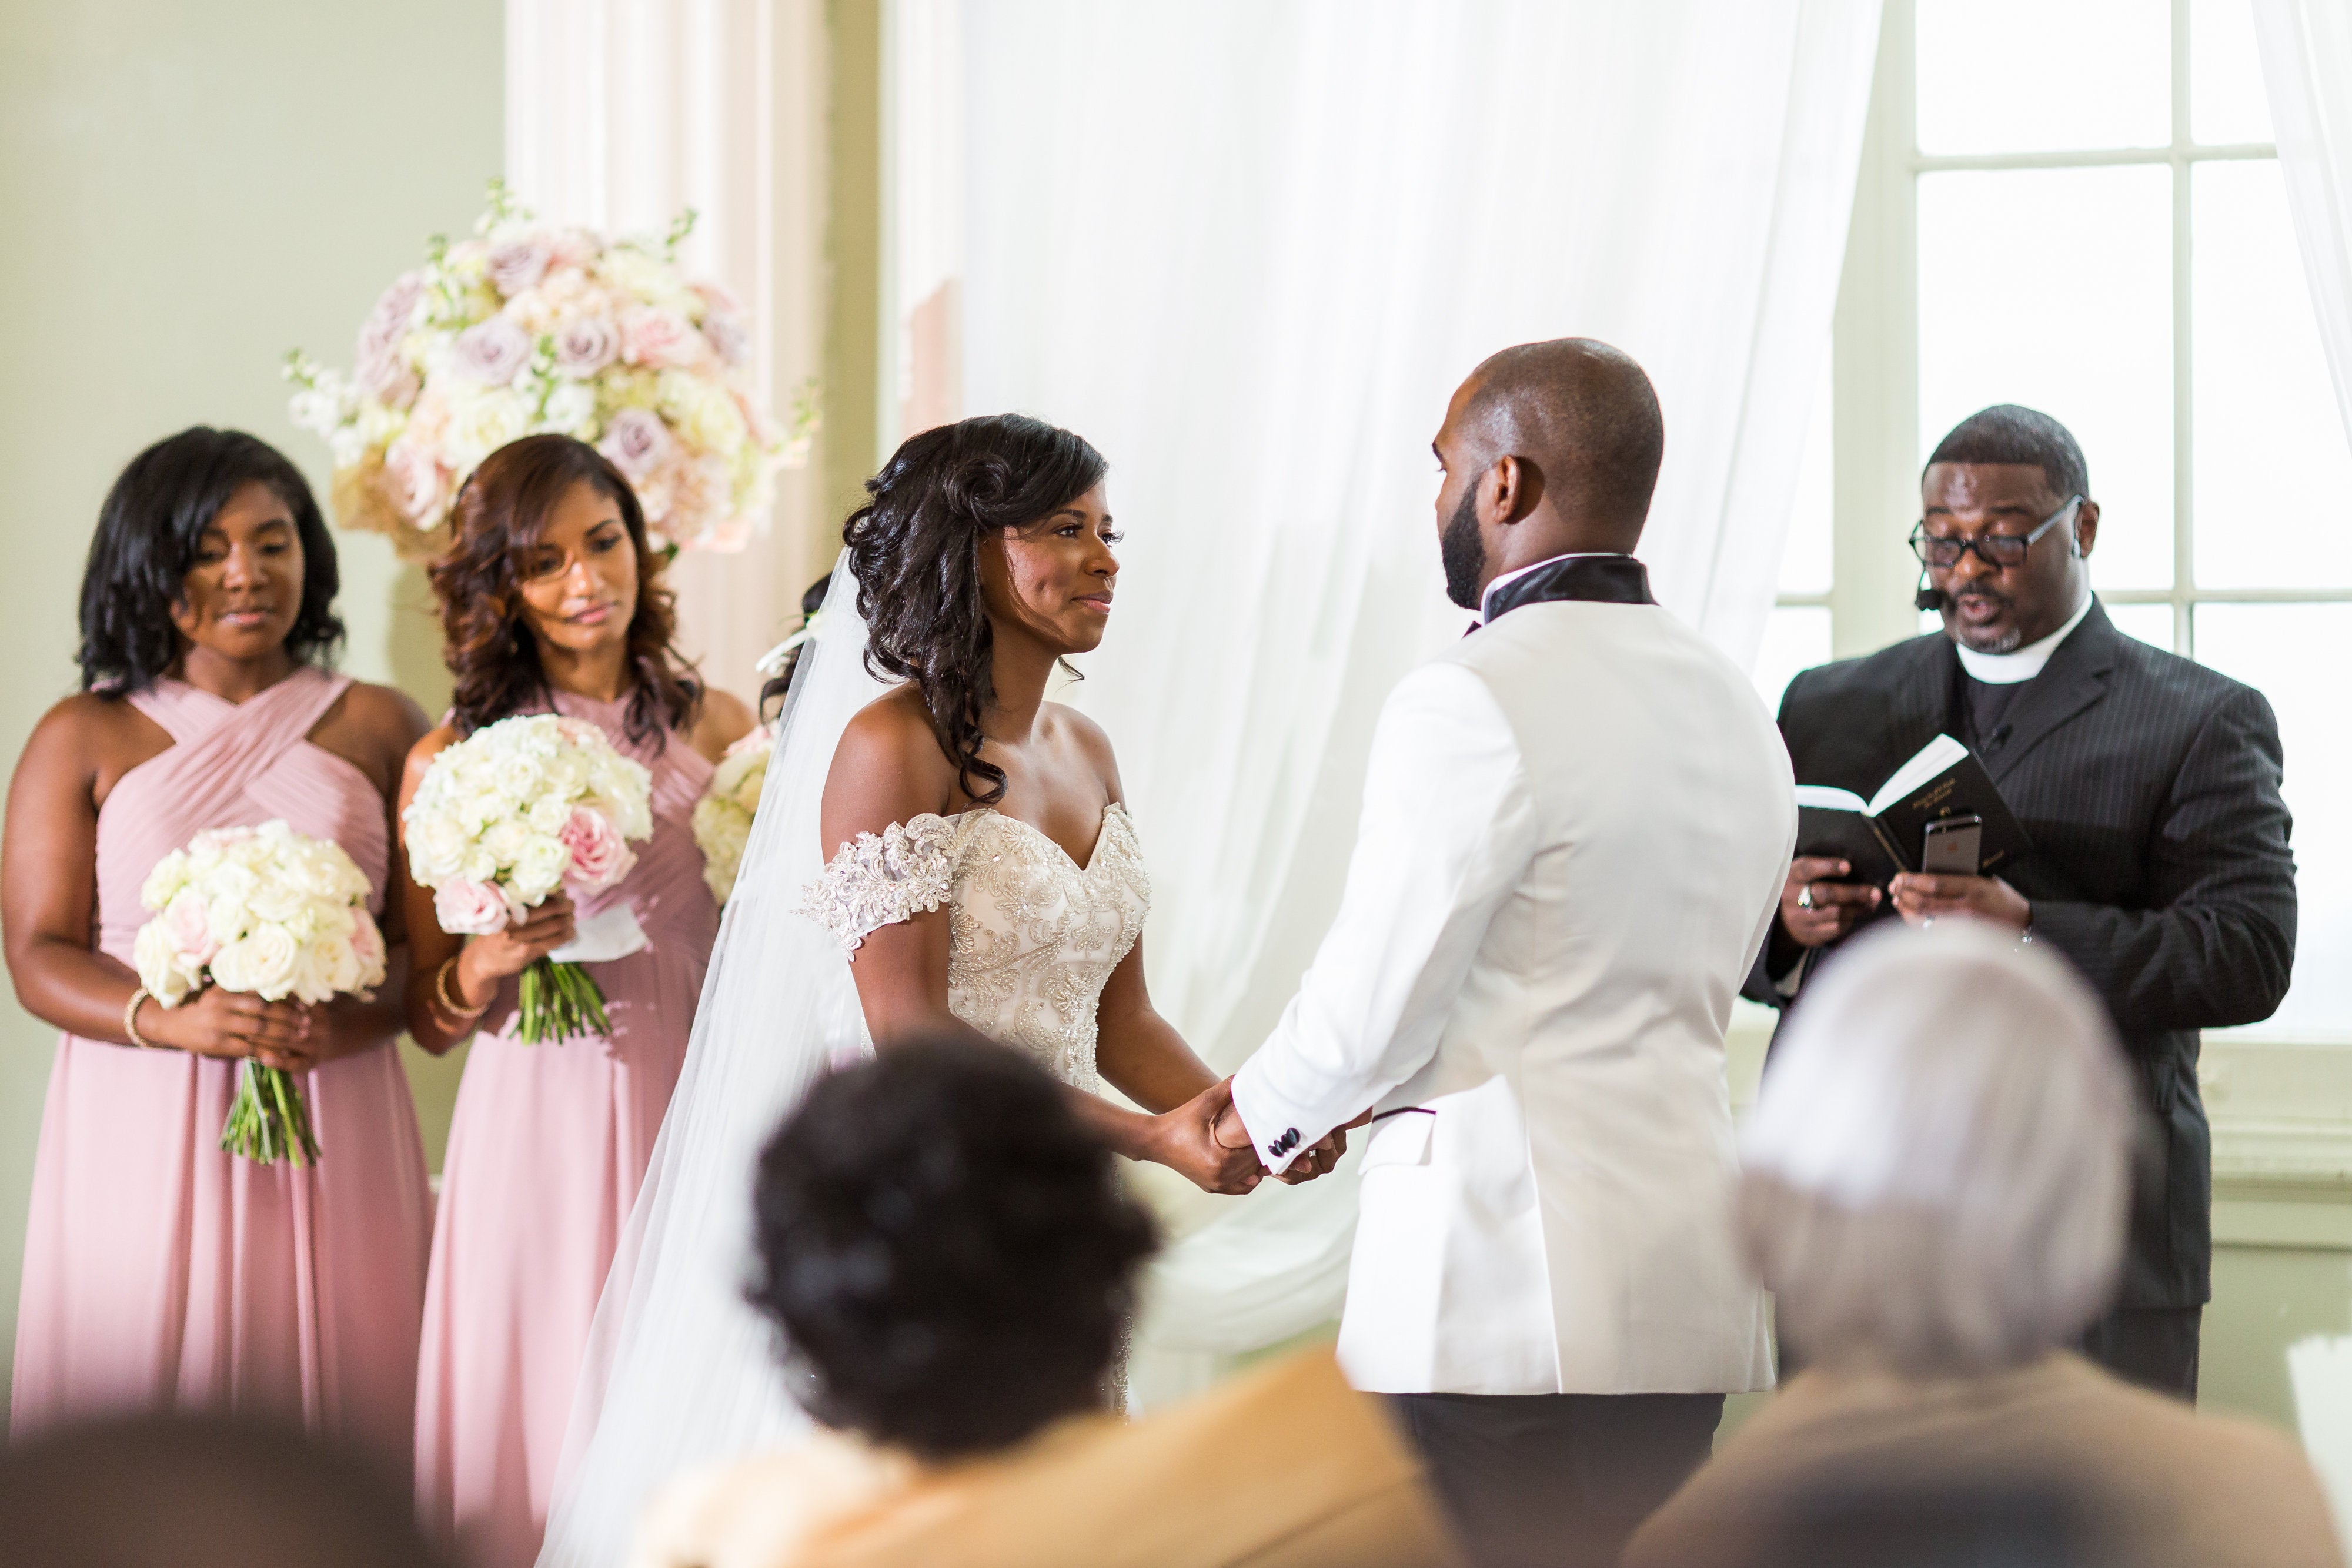 Bridal Bliss: Alexis And Rashod's Romantic Wedding Will Take Your Breath Away
